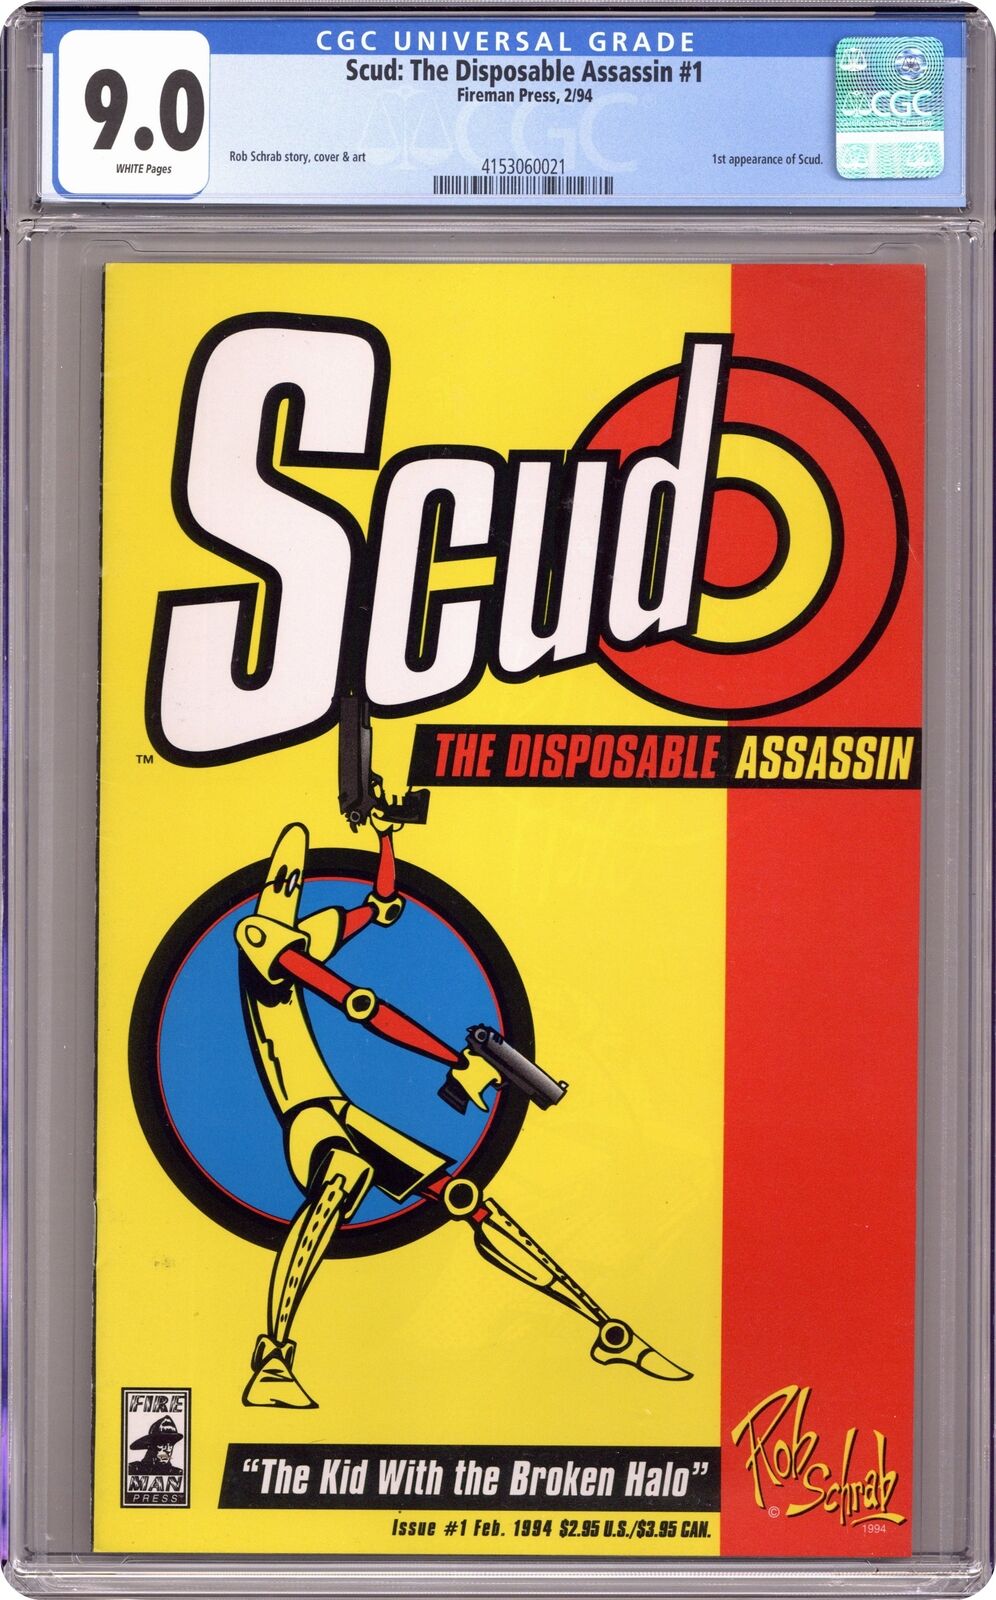 Scud The Disposable Assassin #1-1ST CGC 9.0 1994 4153060021